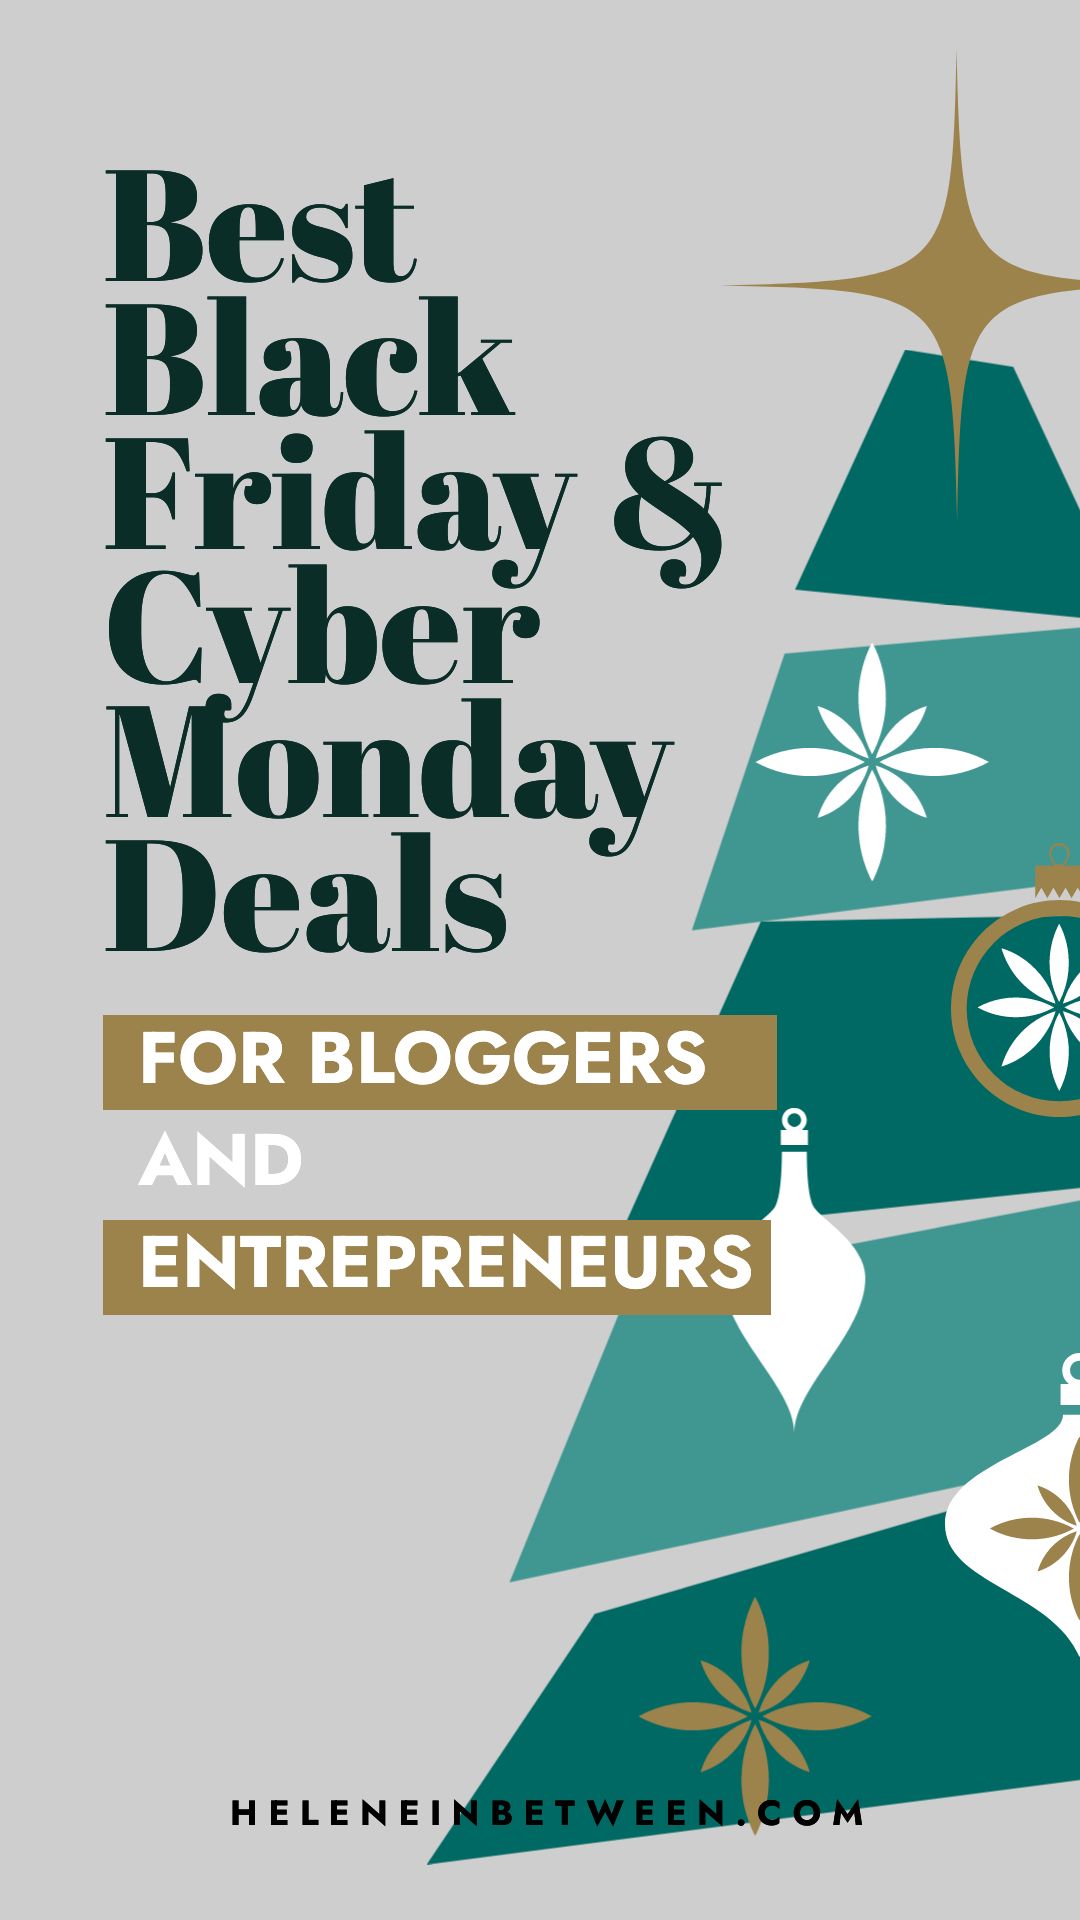 Best Black Friday Cyber Monday Deals for Bloggers and Entrepreneurs 2020 instagram stories 1